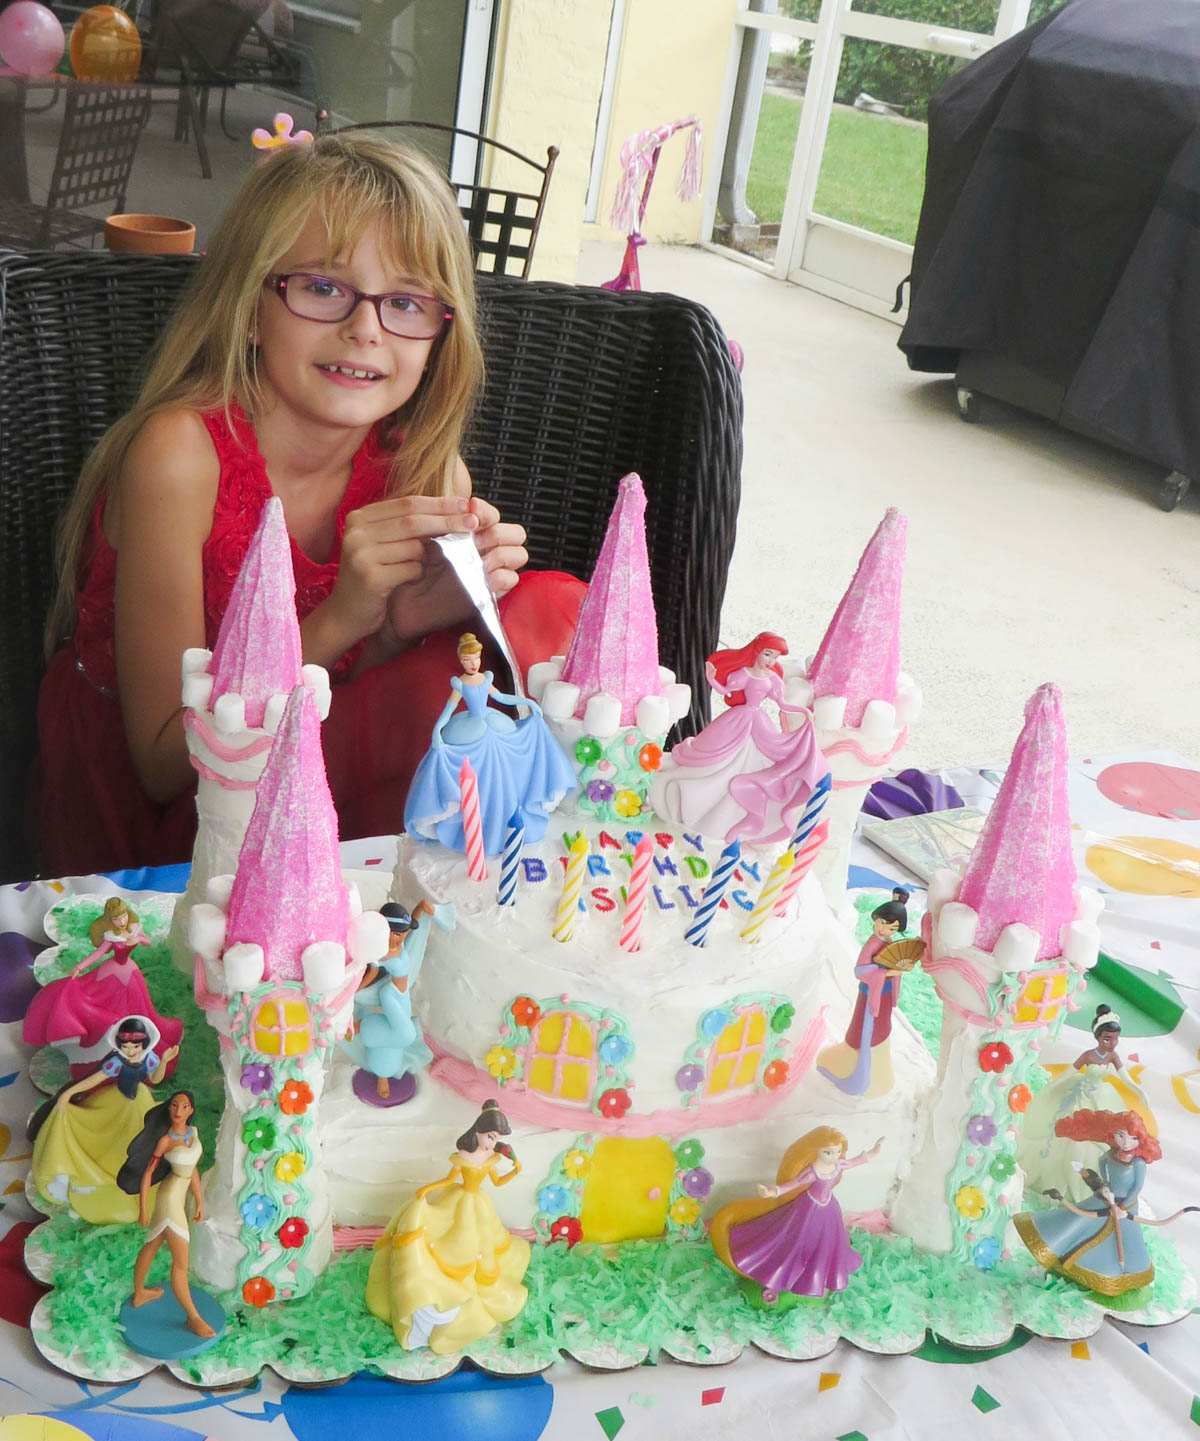 Young girl in red, wearing glasses, sits before a birthday cake adorned with princess figurines and colorful decorations, smiling while holding a candle.